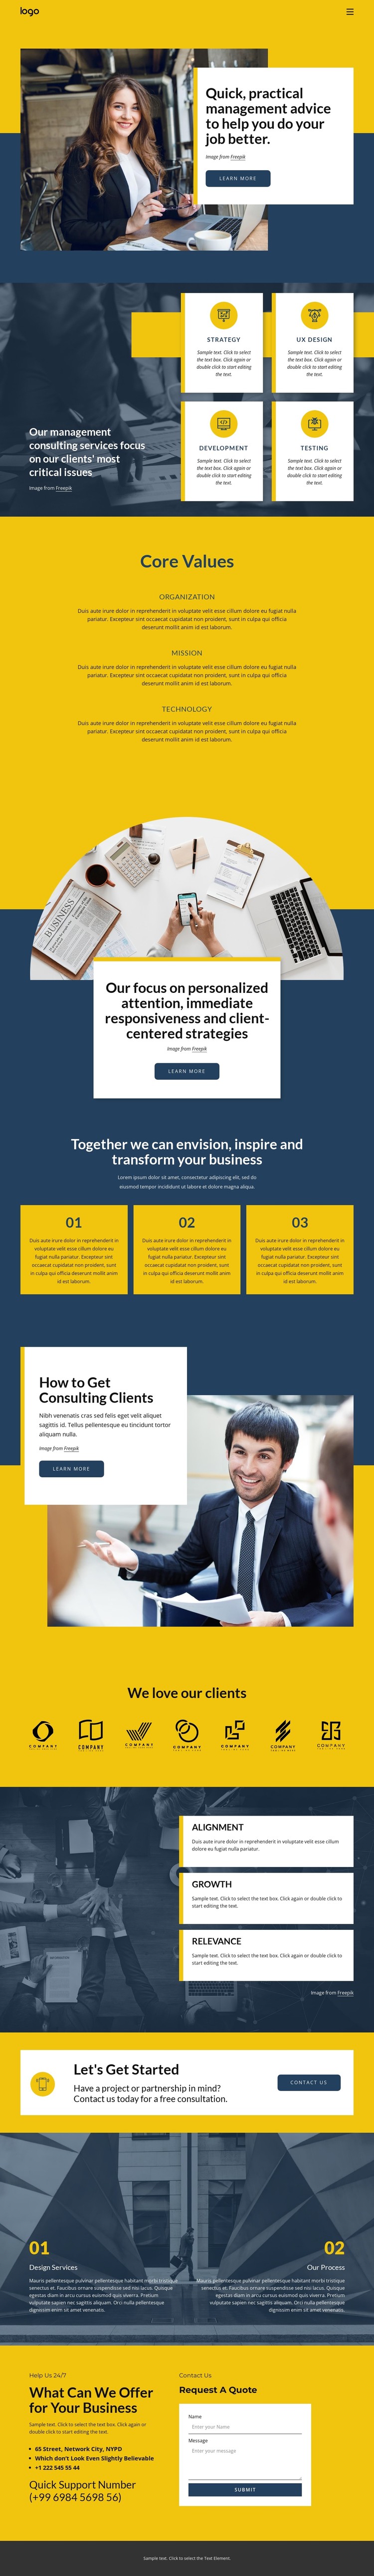 Business consulting firm CSS Template